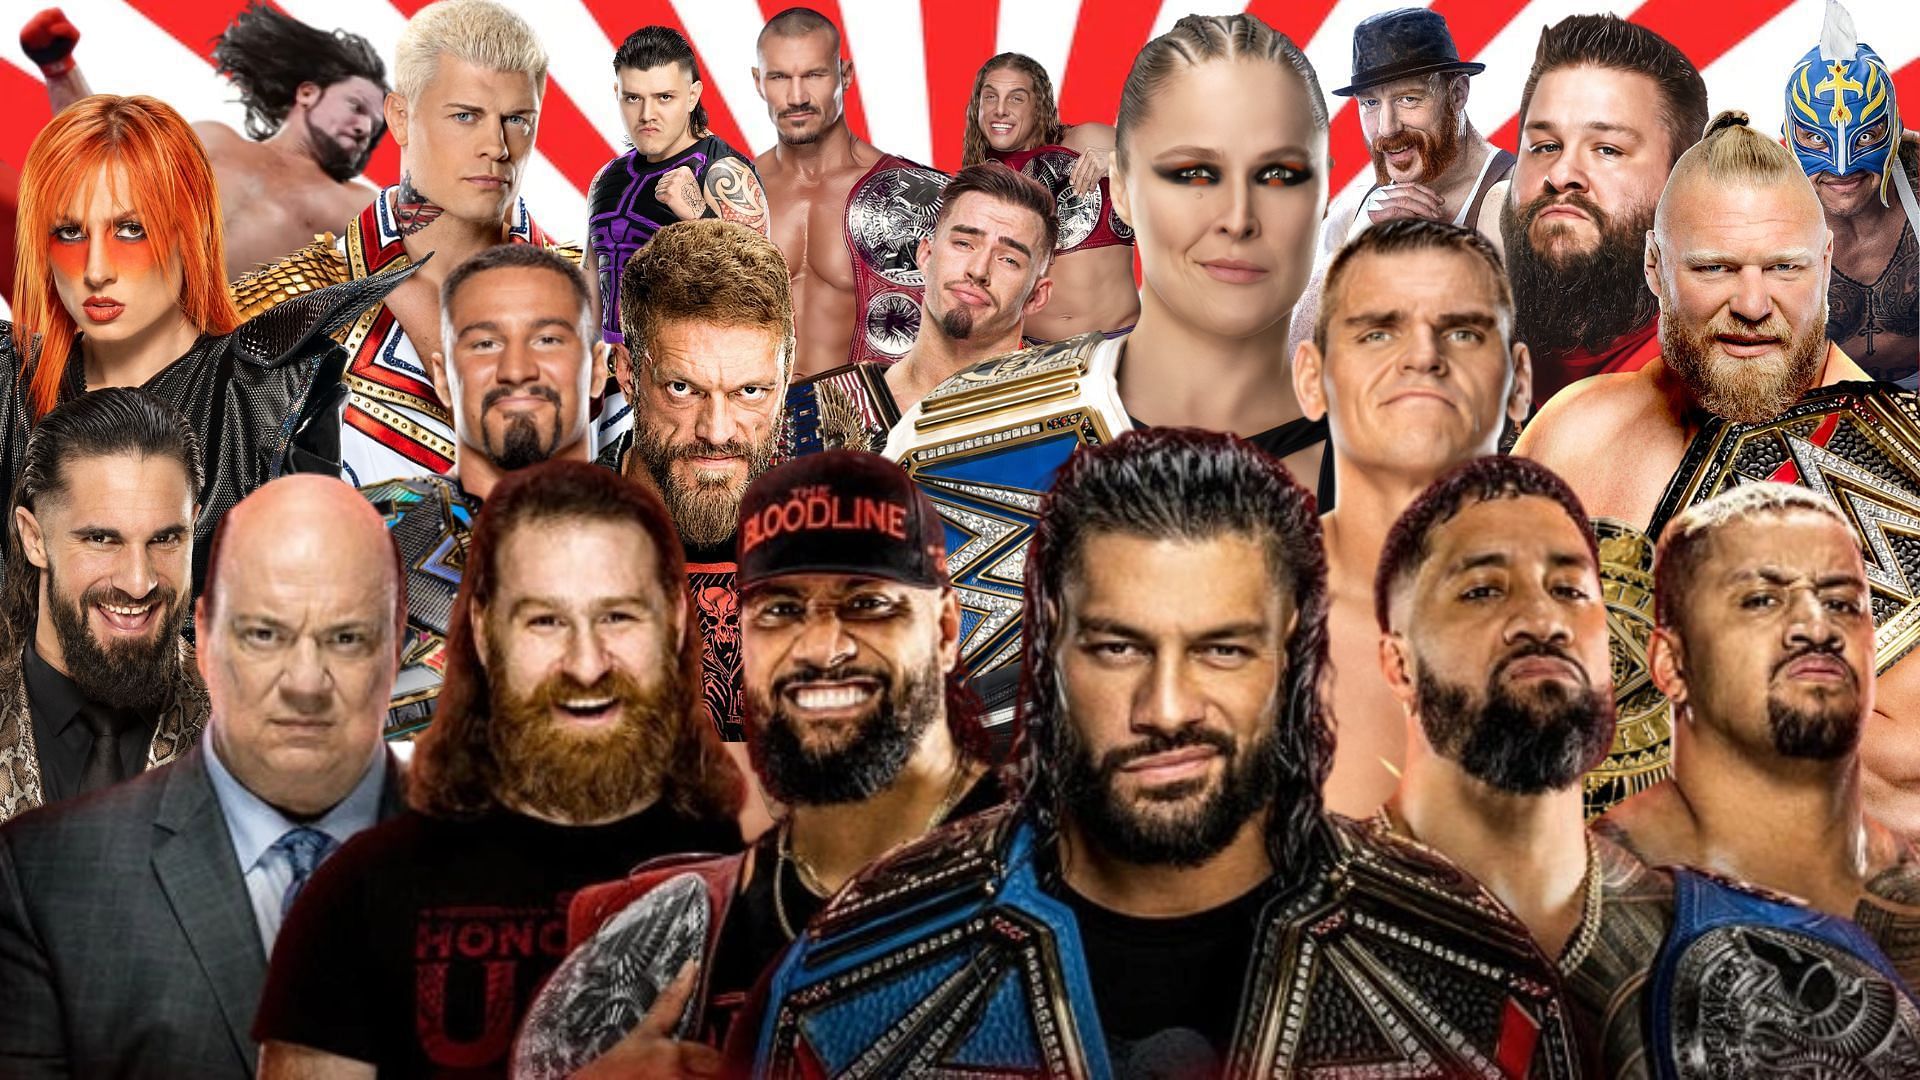 wwe 2022 roster